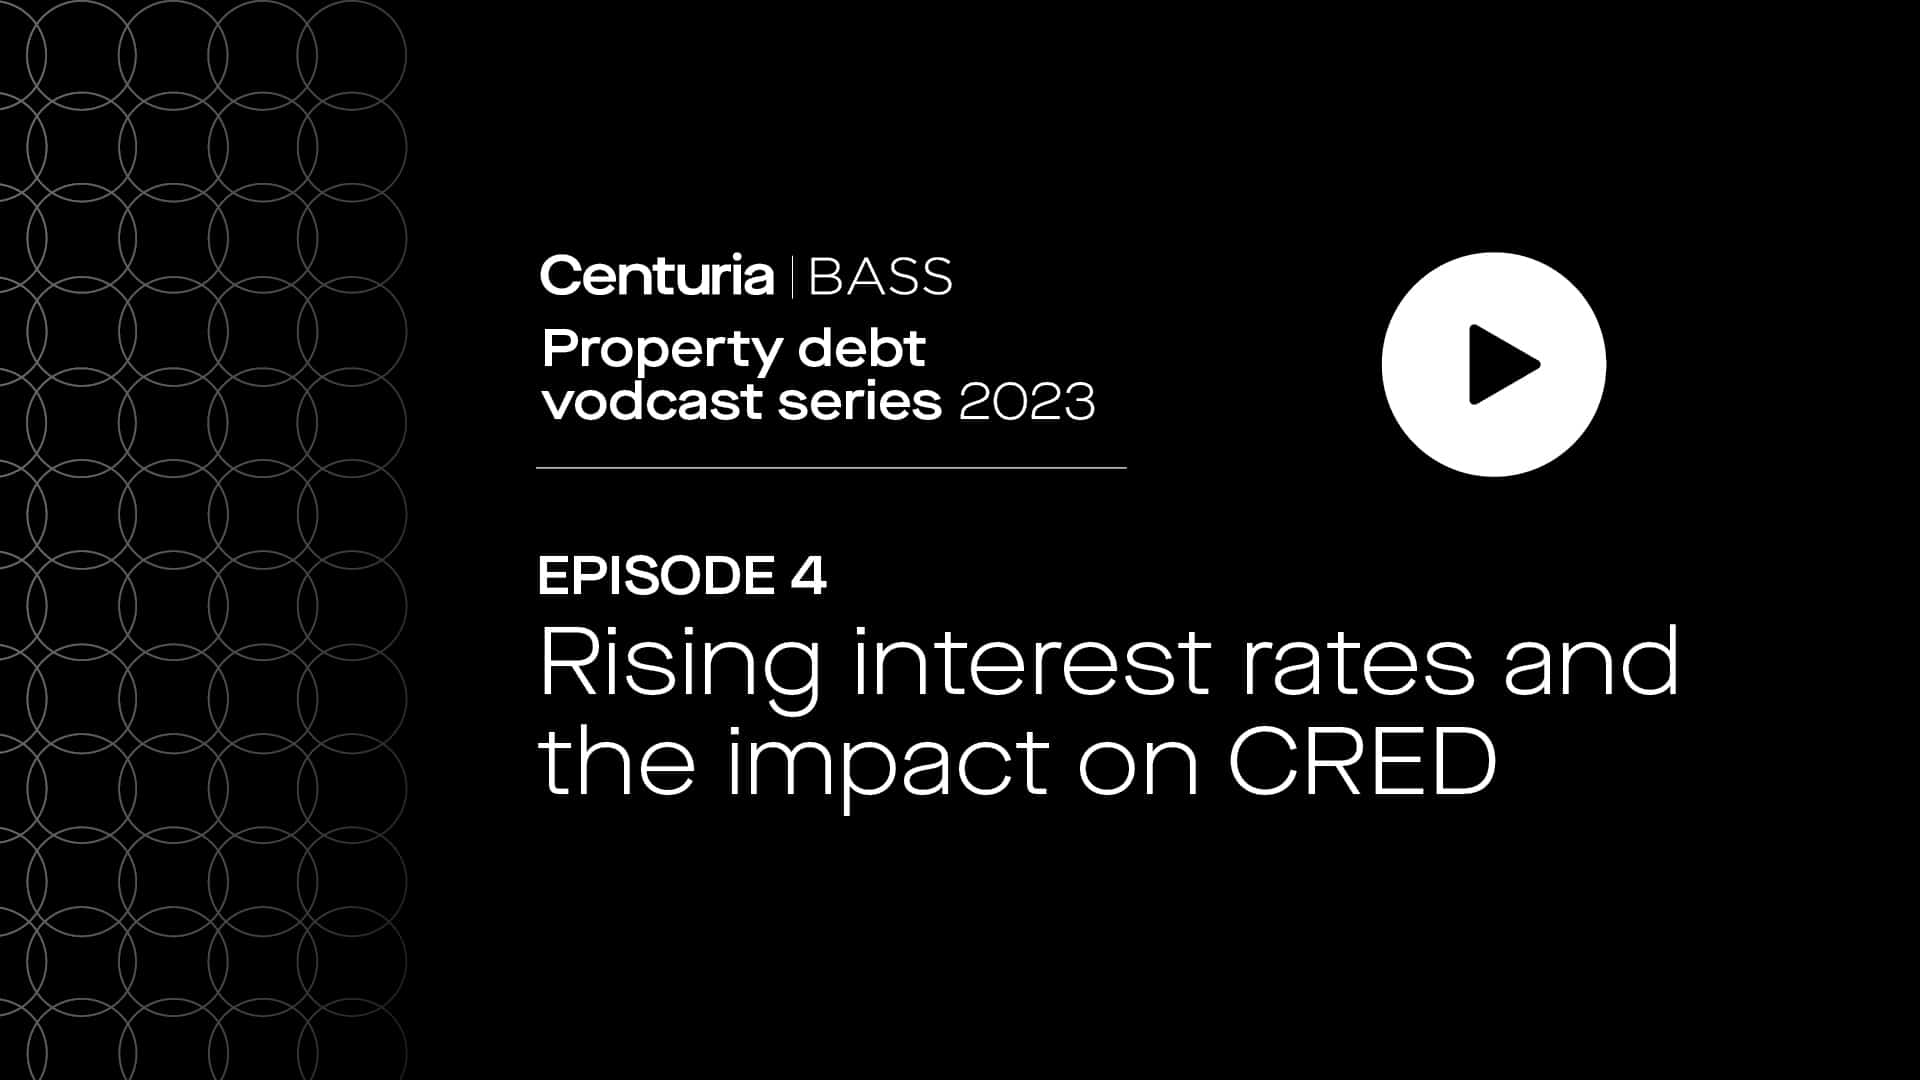 Rising interest rates and the impact on CRED